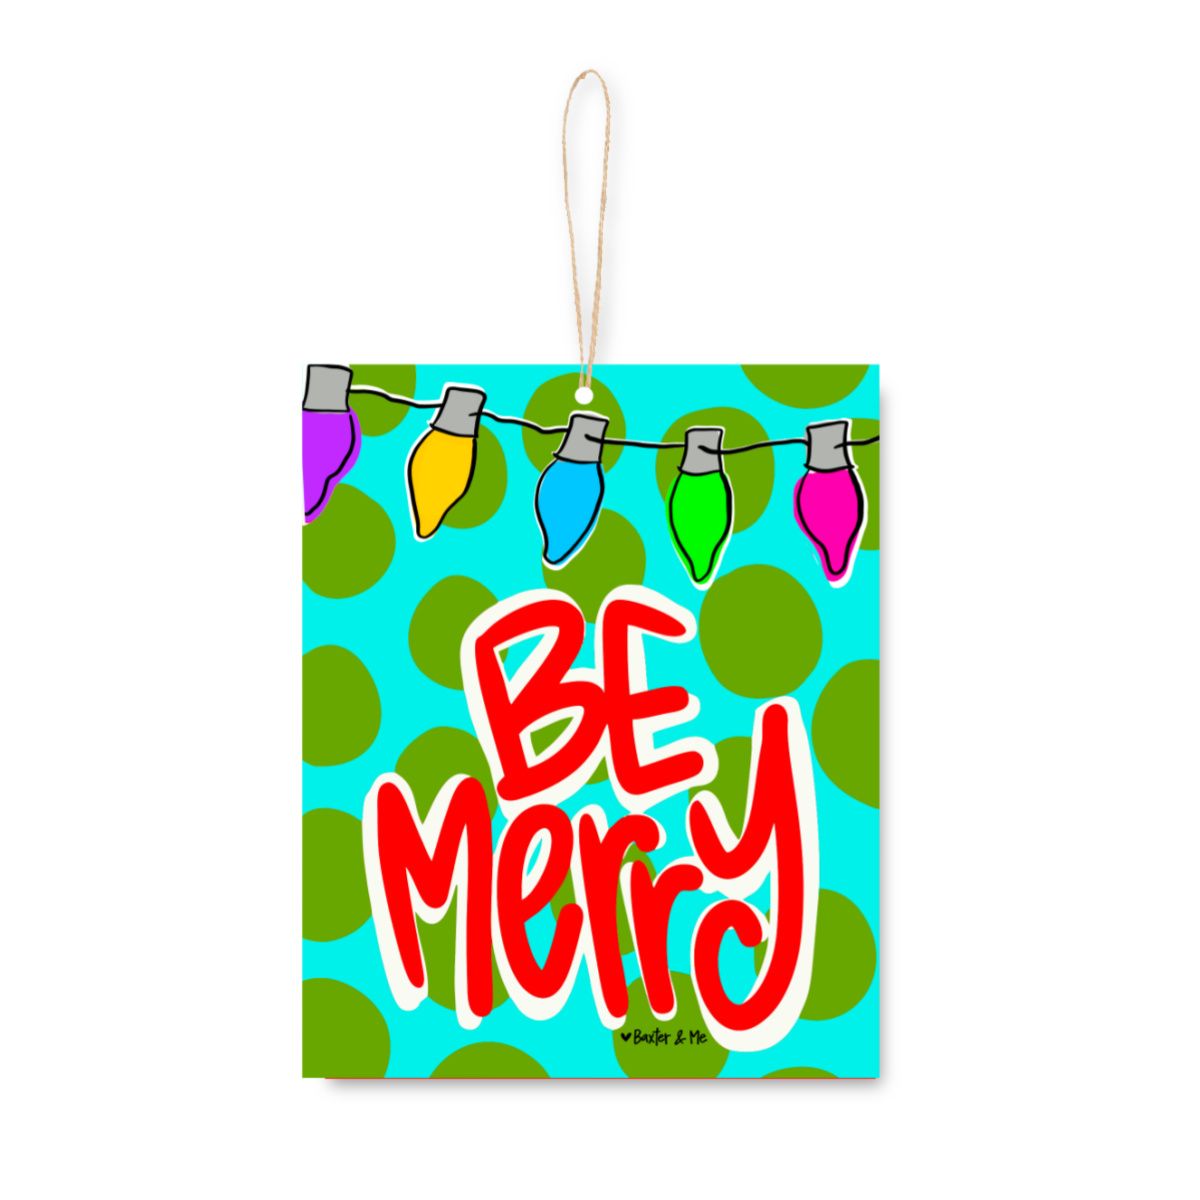 Be Merry Christmas Lights Ornament